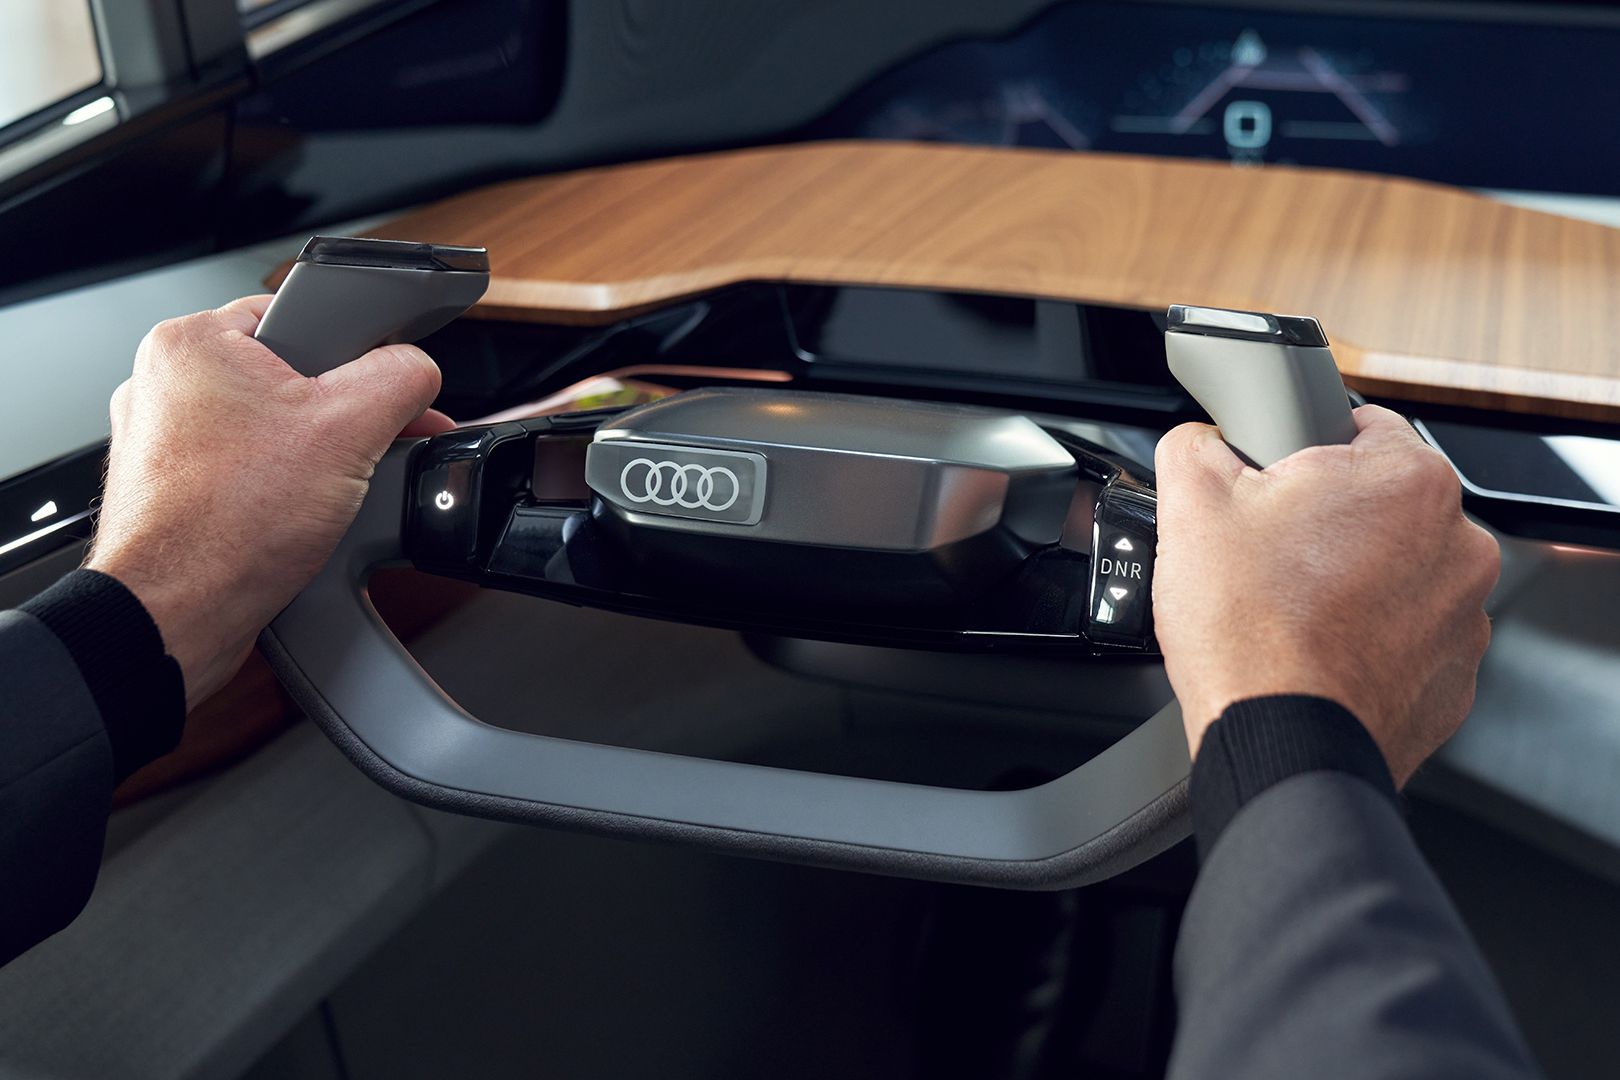 Audi reshapes branding with new slogan 'Future is an Attitude'